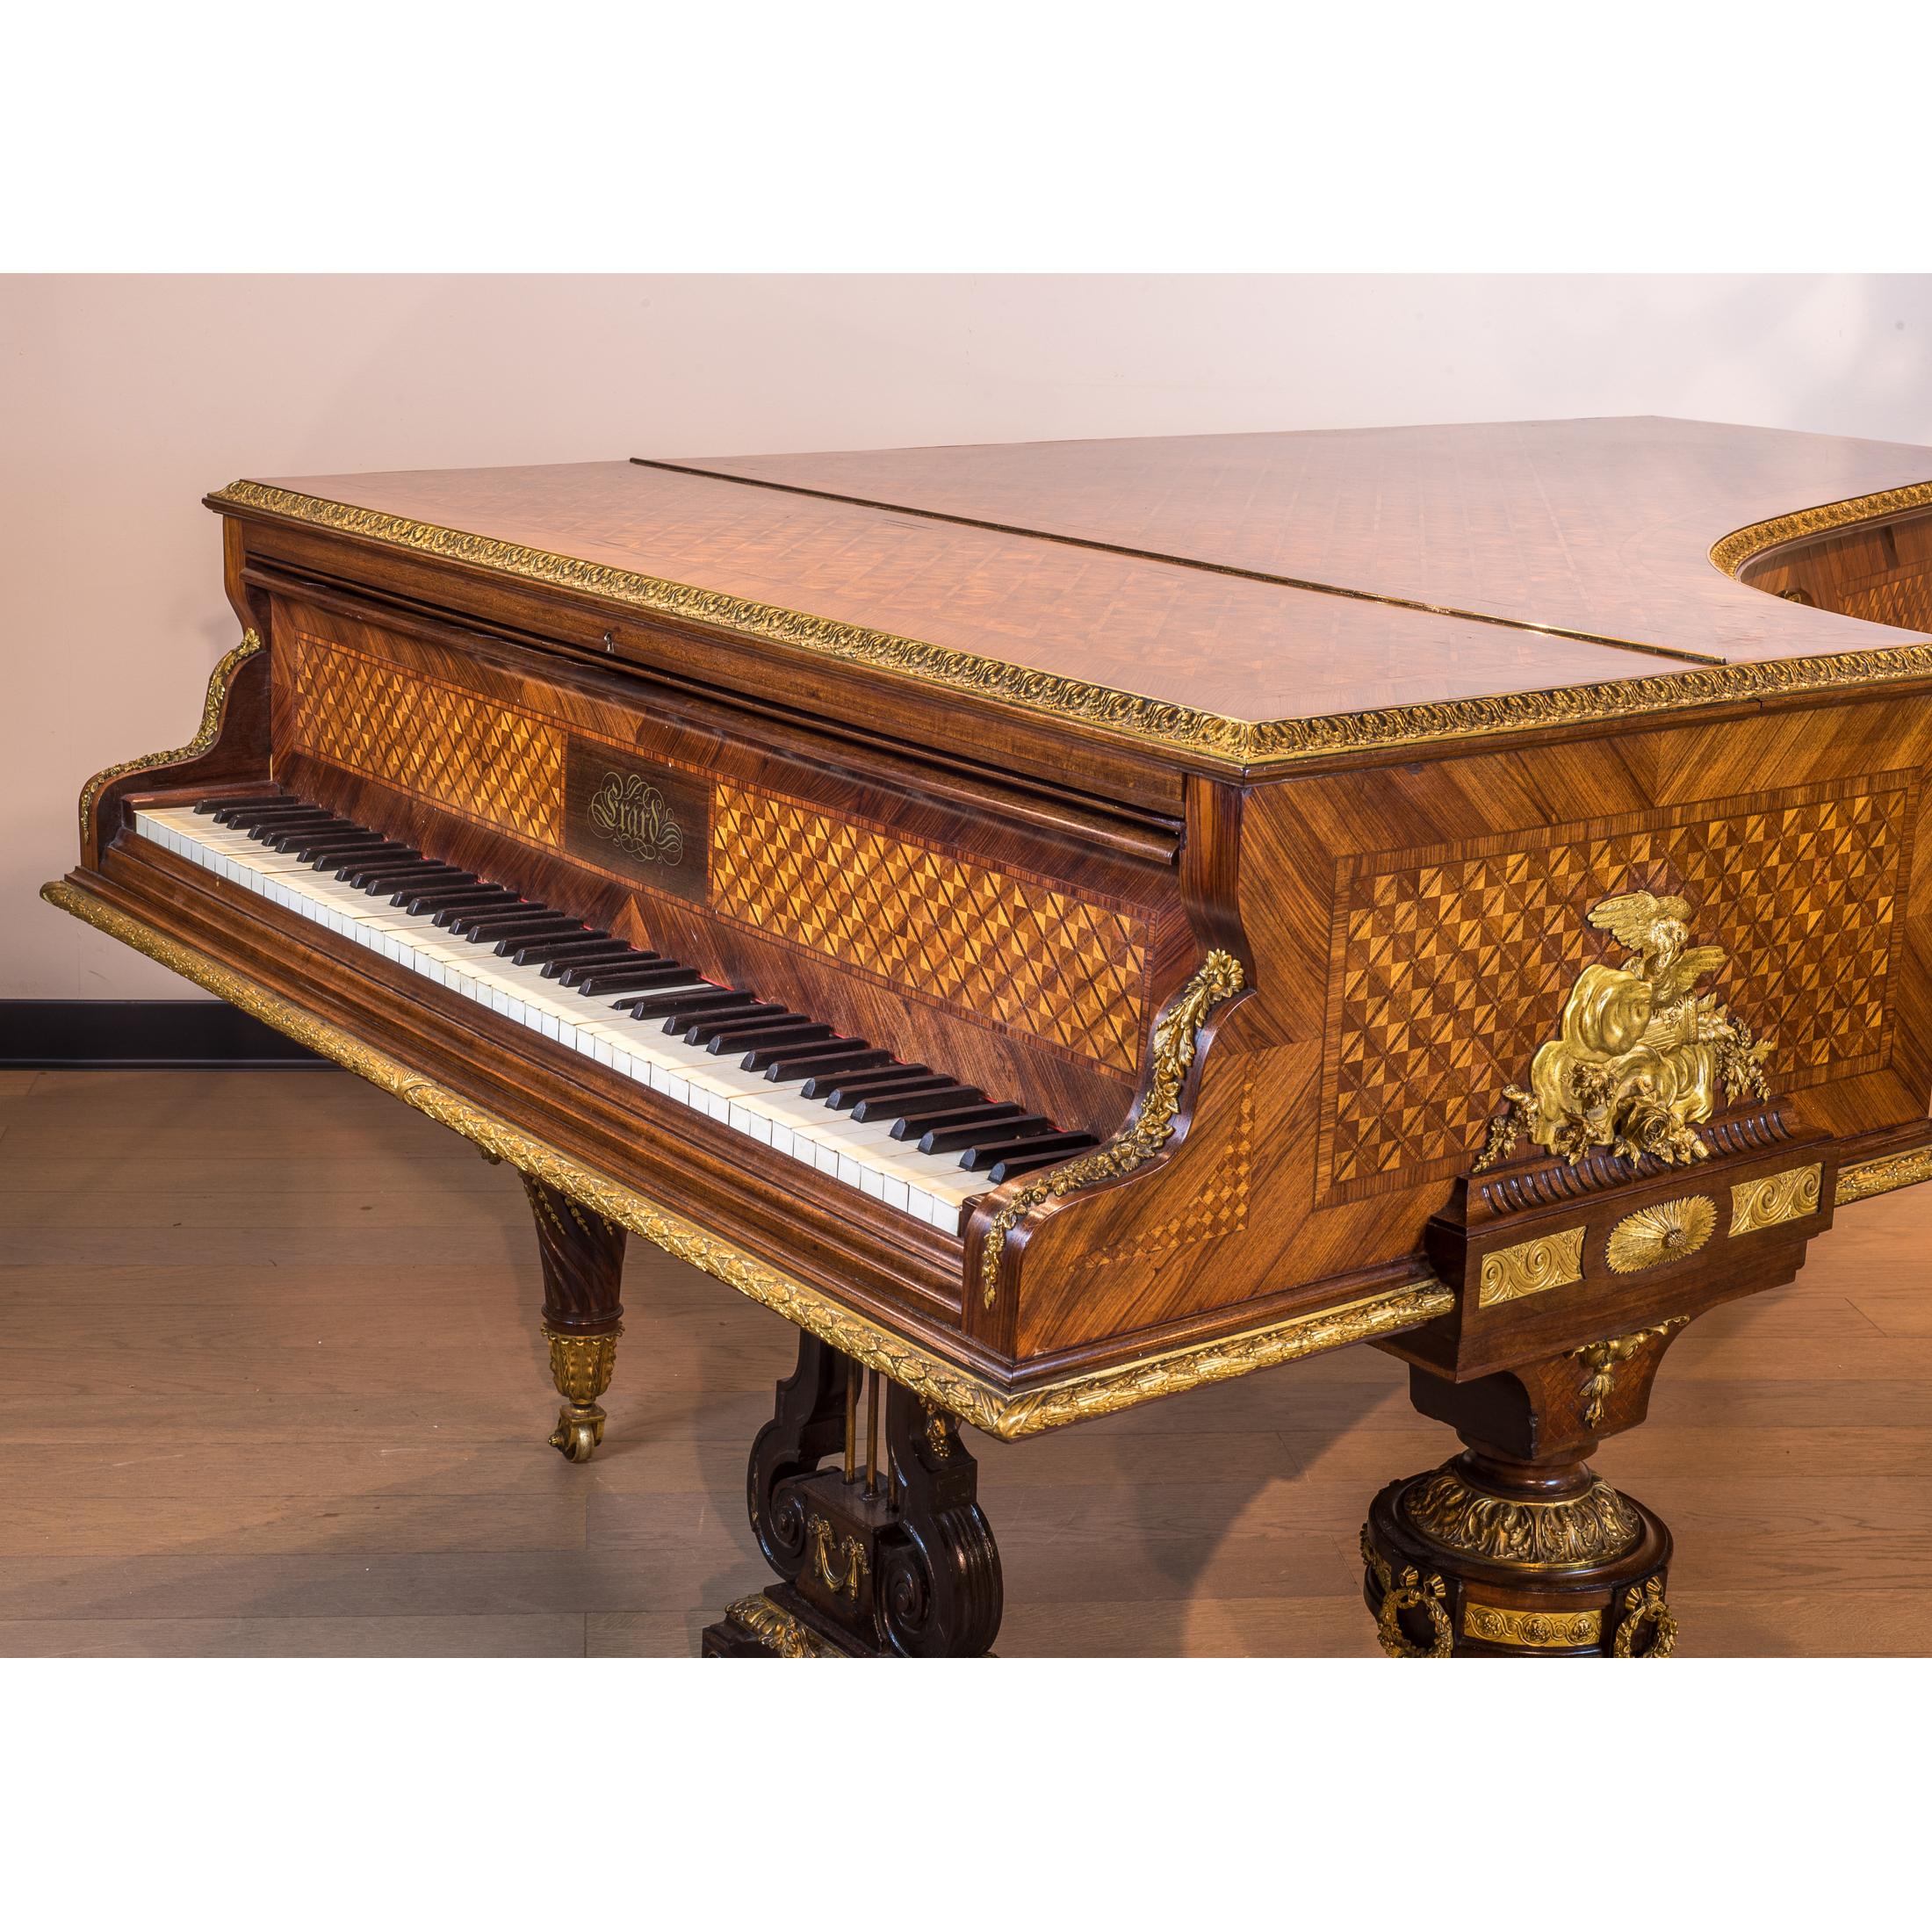 French Important Ormolu-Mounted Amaranth, Kingwood and Satine Parquetry Grand Piano For Sale